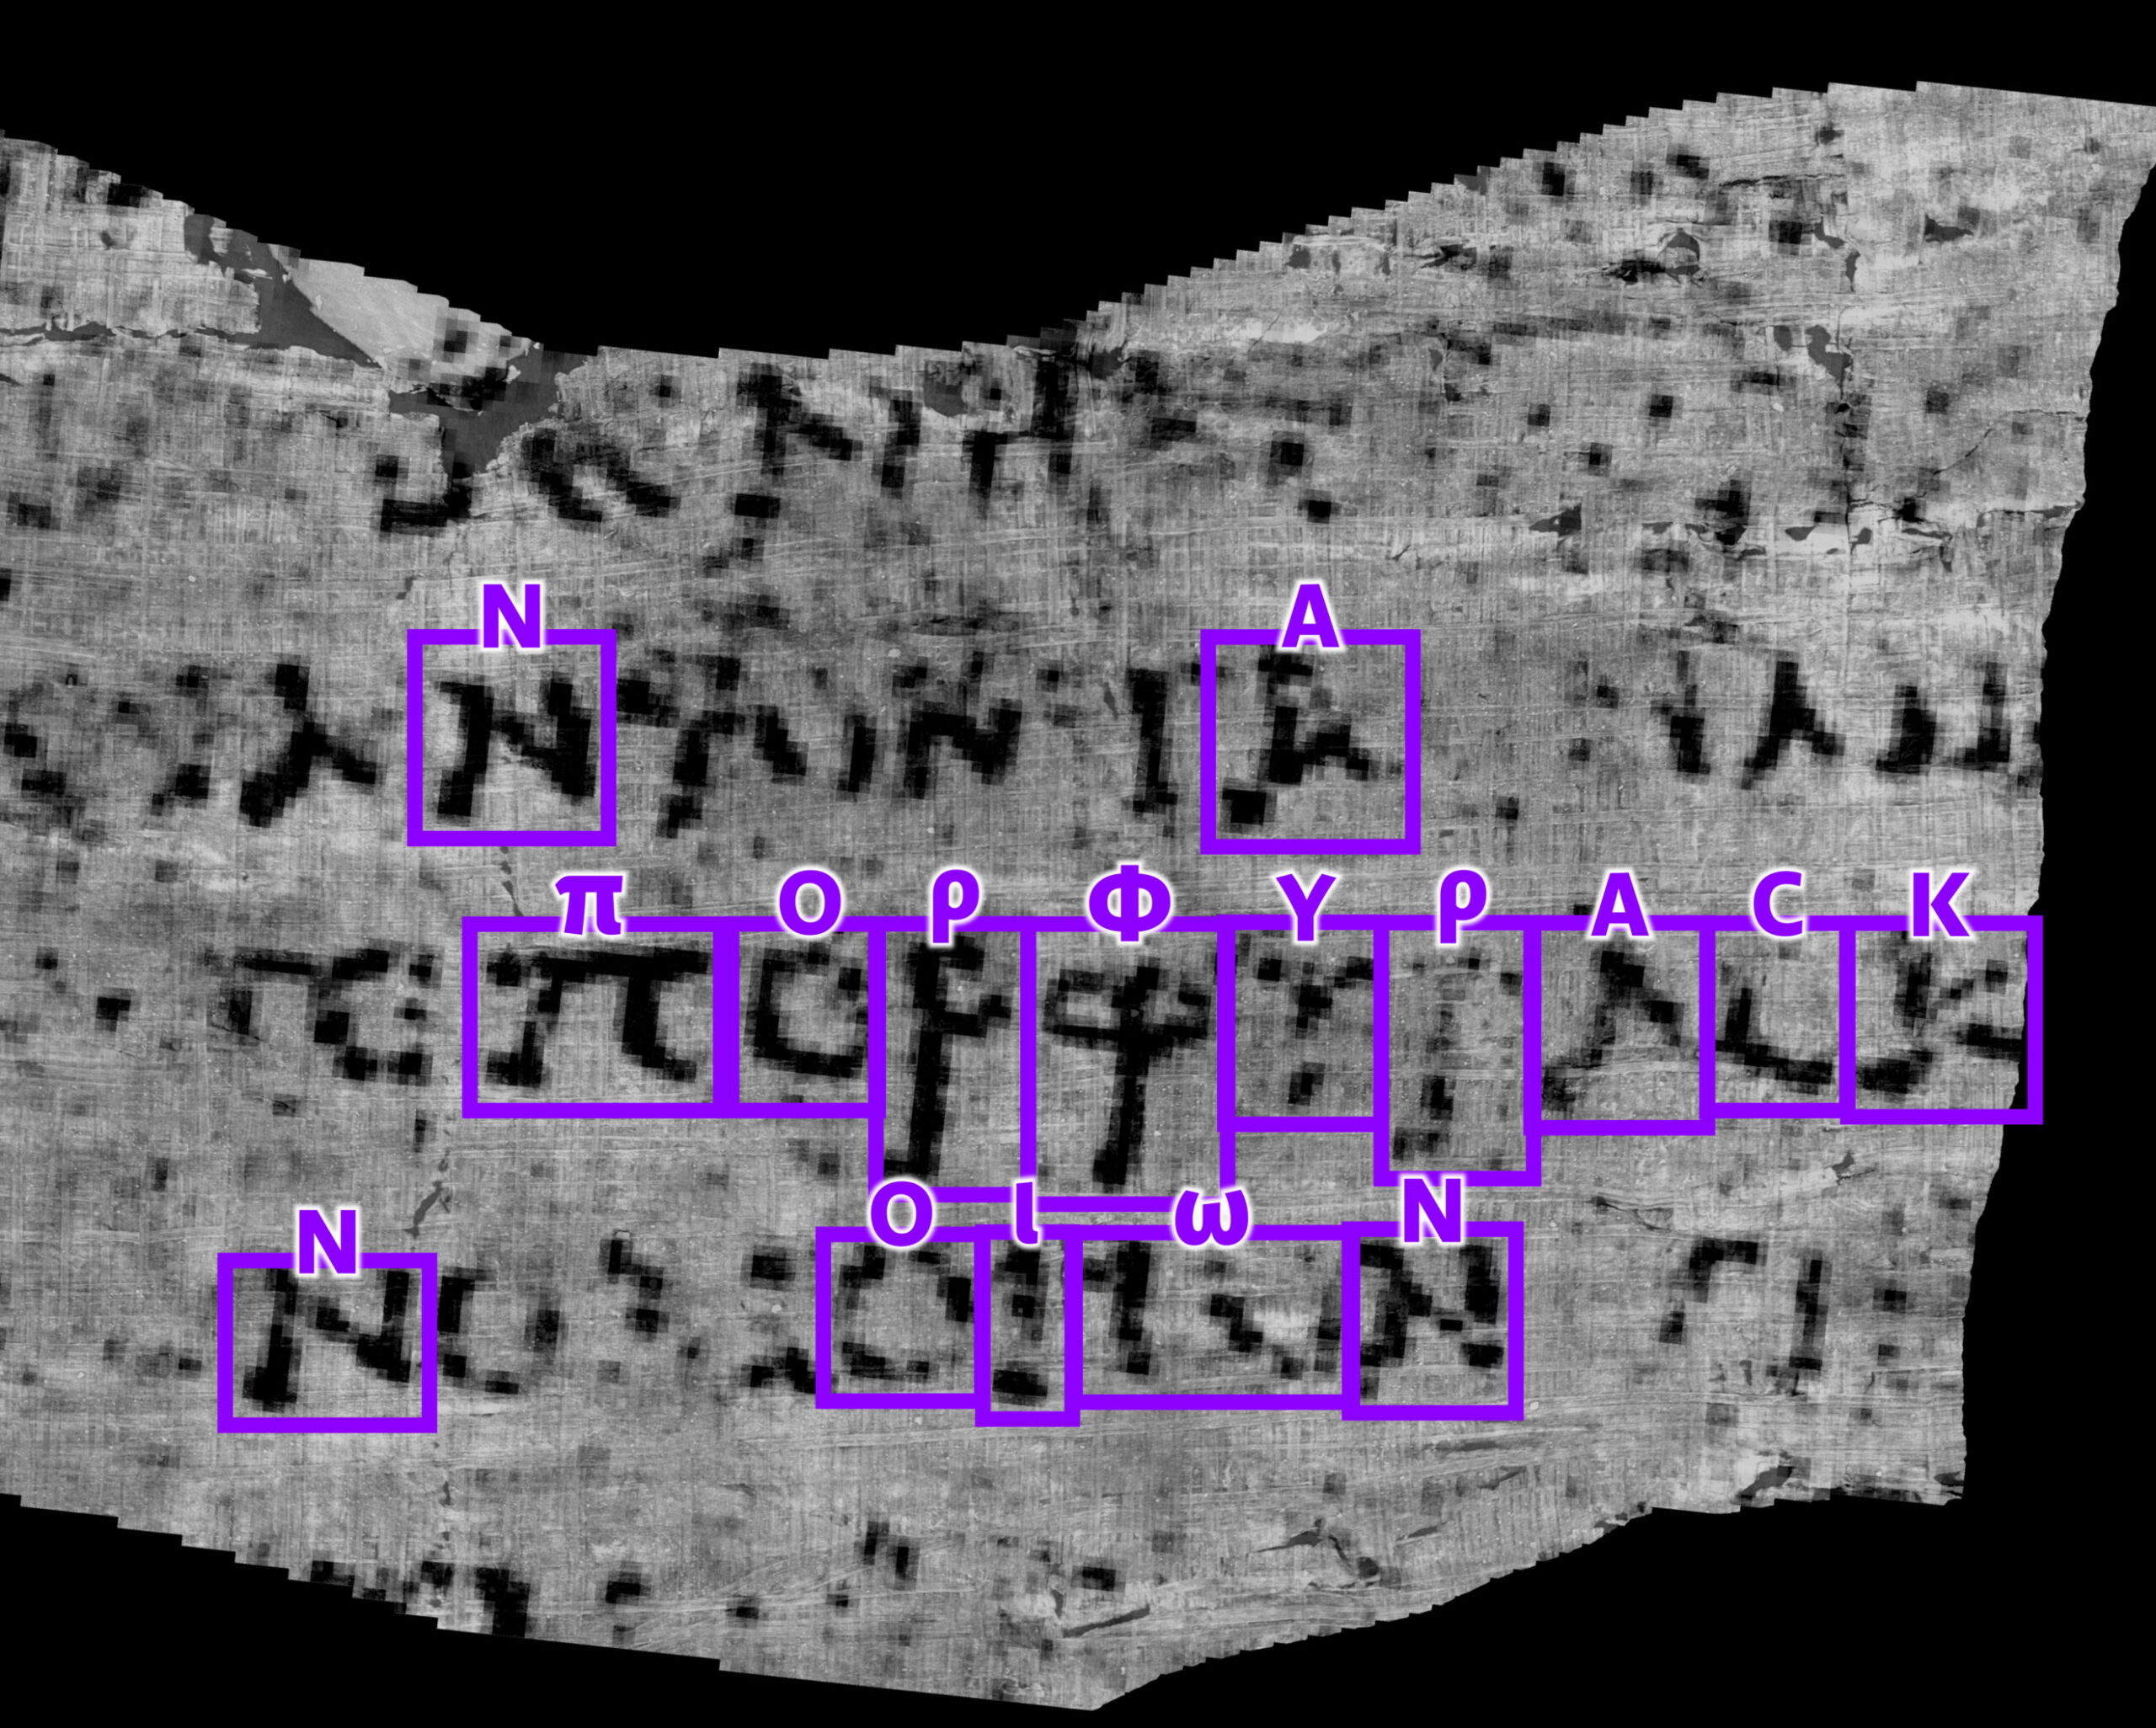 Computer-assisted photograph showing visible letters on a rolled scroll, with highlighting showing those that can be deciphered, forming a word.